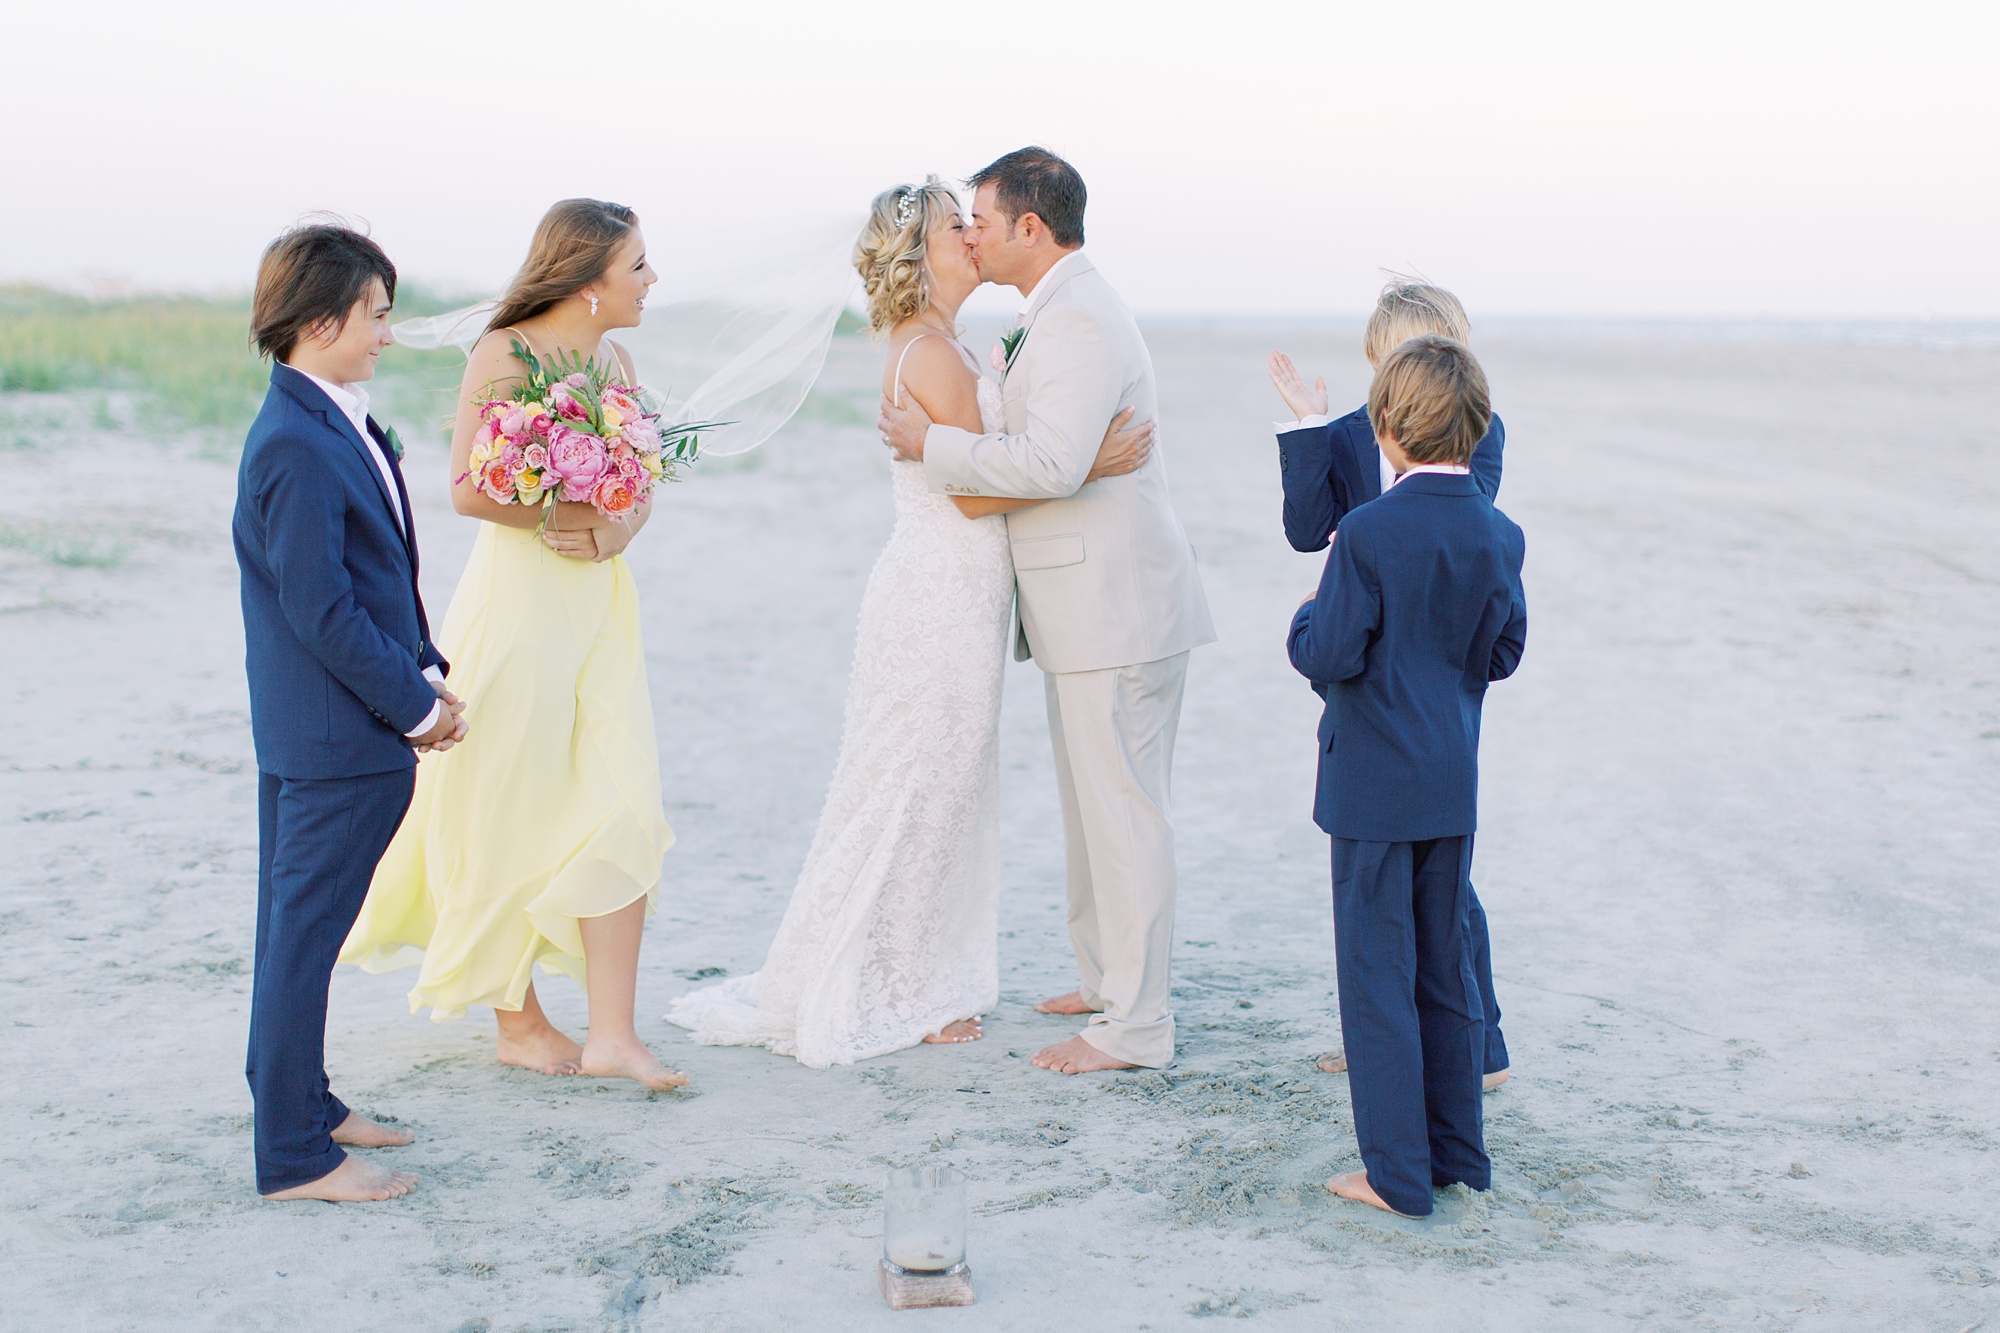 Sullivan's Island intimate wedding ceremony for newlyweds and their children